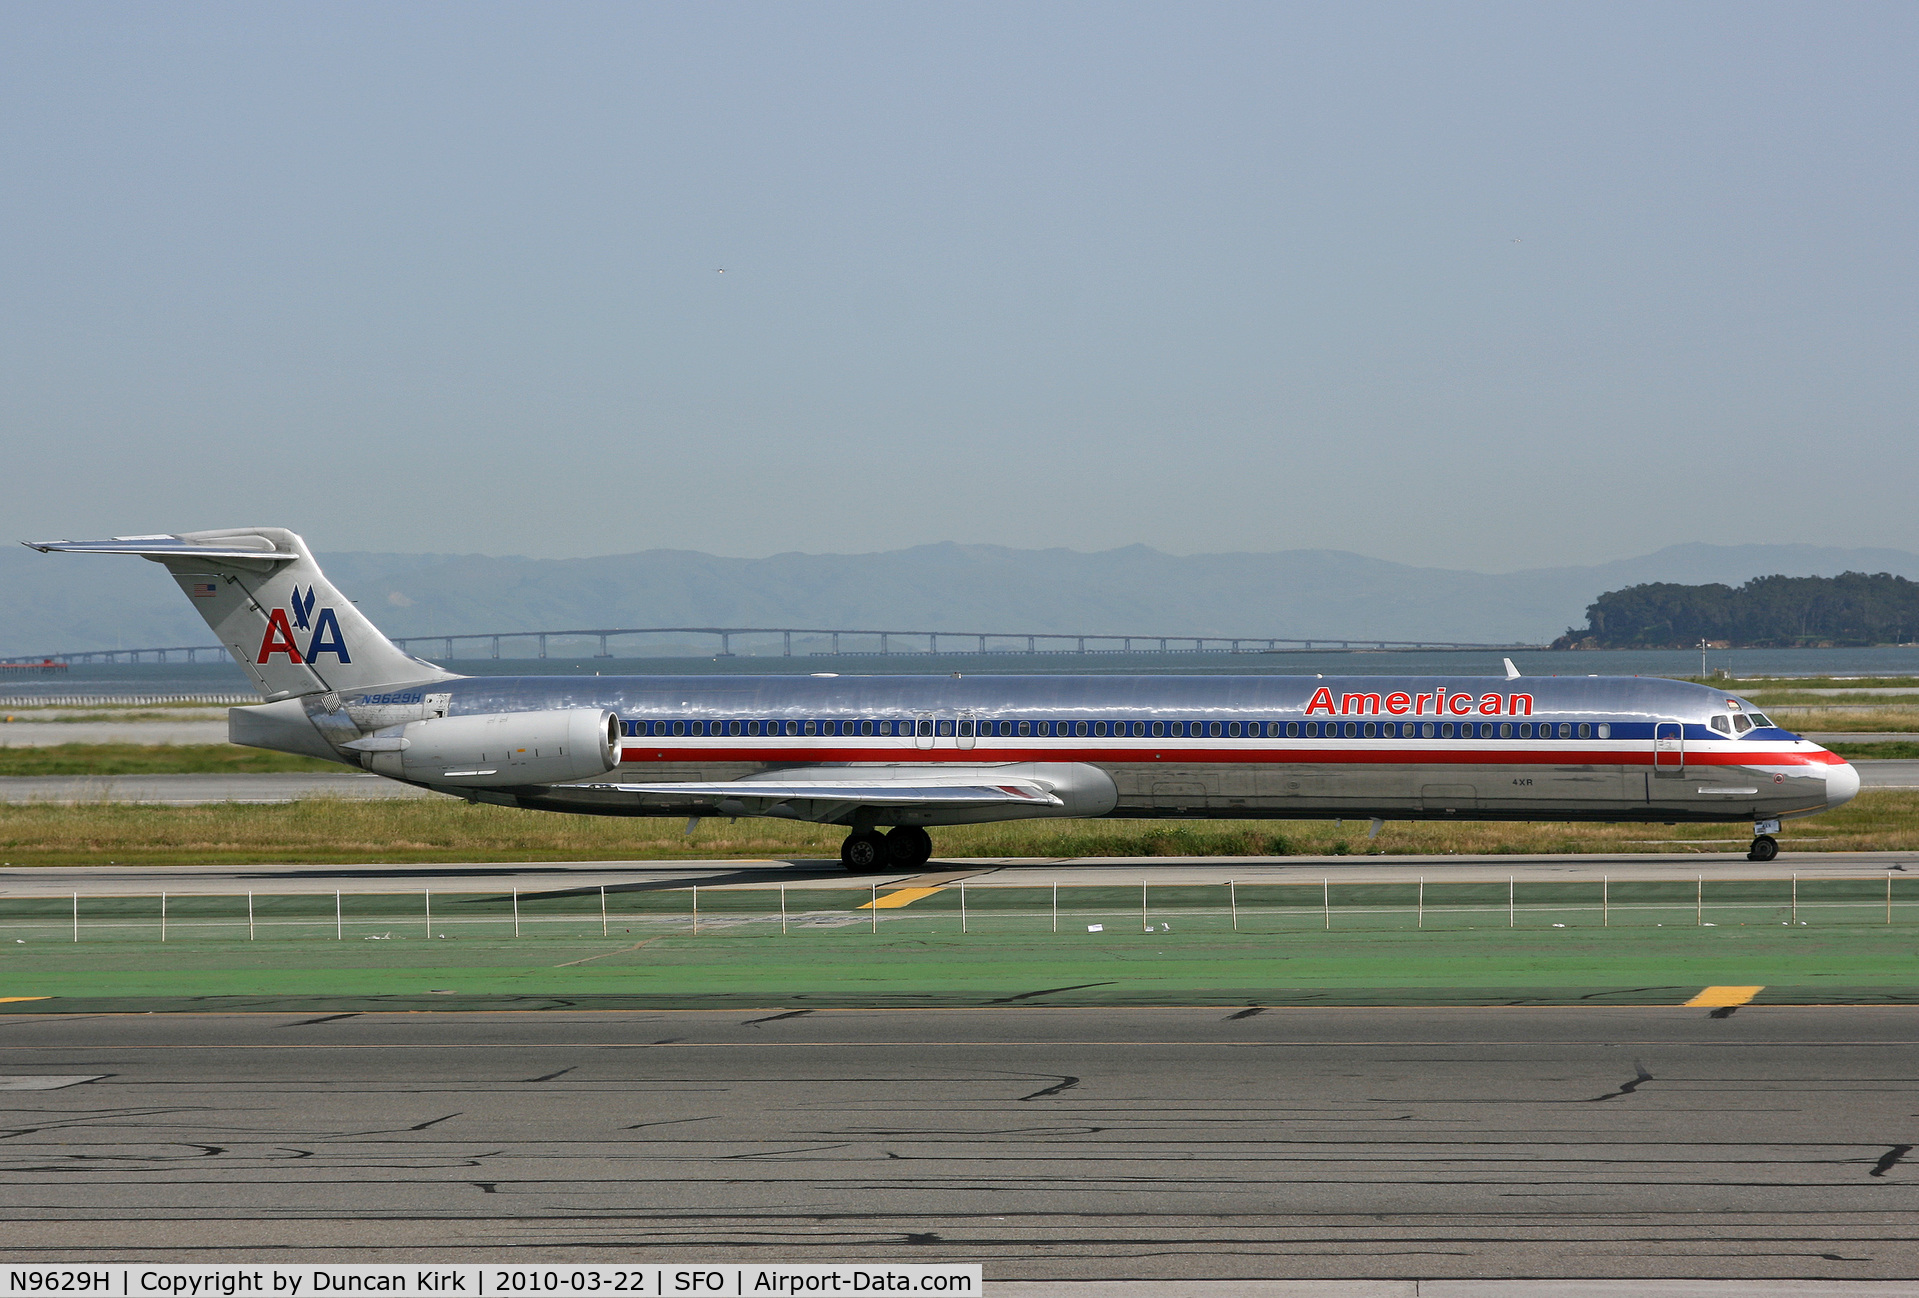 N9629H, 1998 McDonnell Douglas MD-83 (DC-9-83) C/N 53599, Always a difficult scheme to photograph